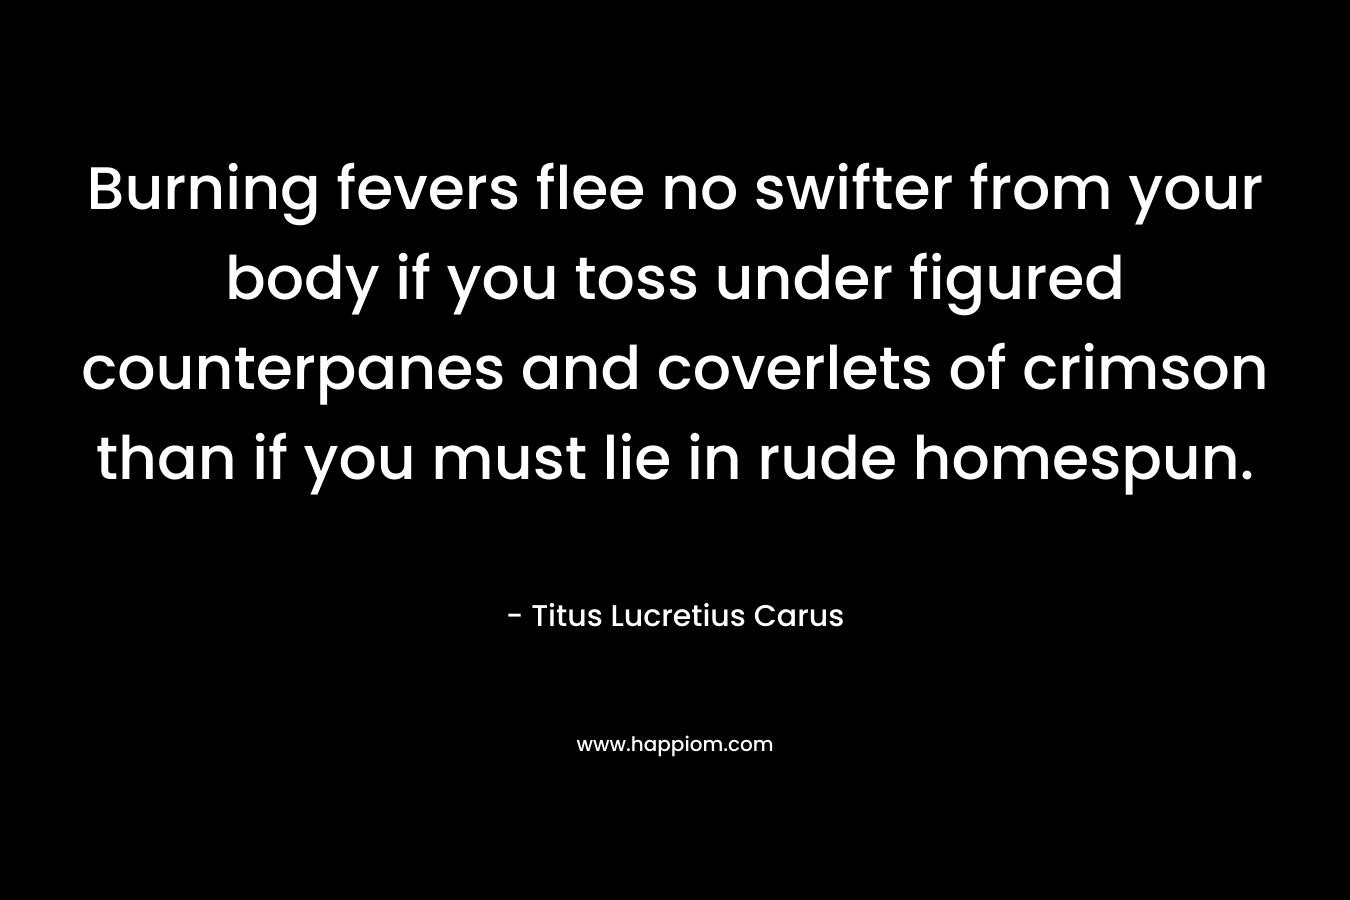 Burning fevers flee no swifter from your body if you toss under figured counterpanes and coverlets of crimson than if you must lie in rude homespun. – Titus Lucretius Carus